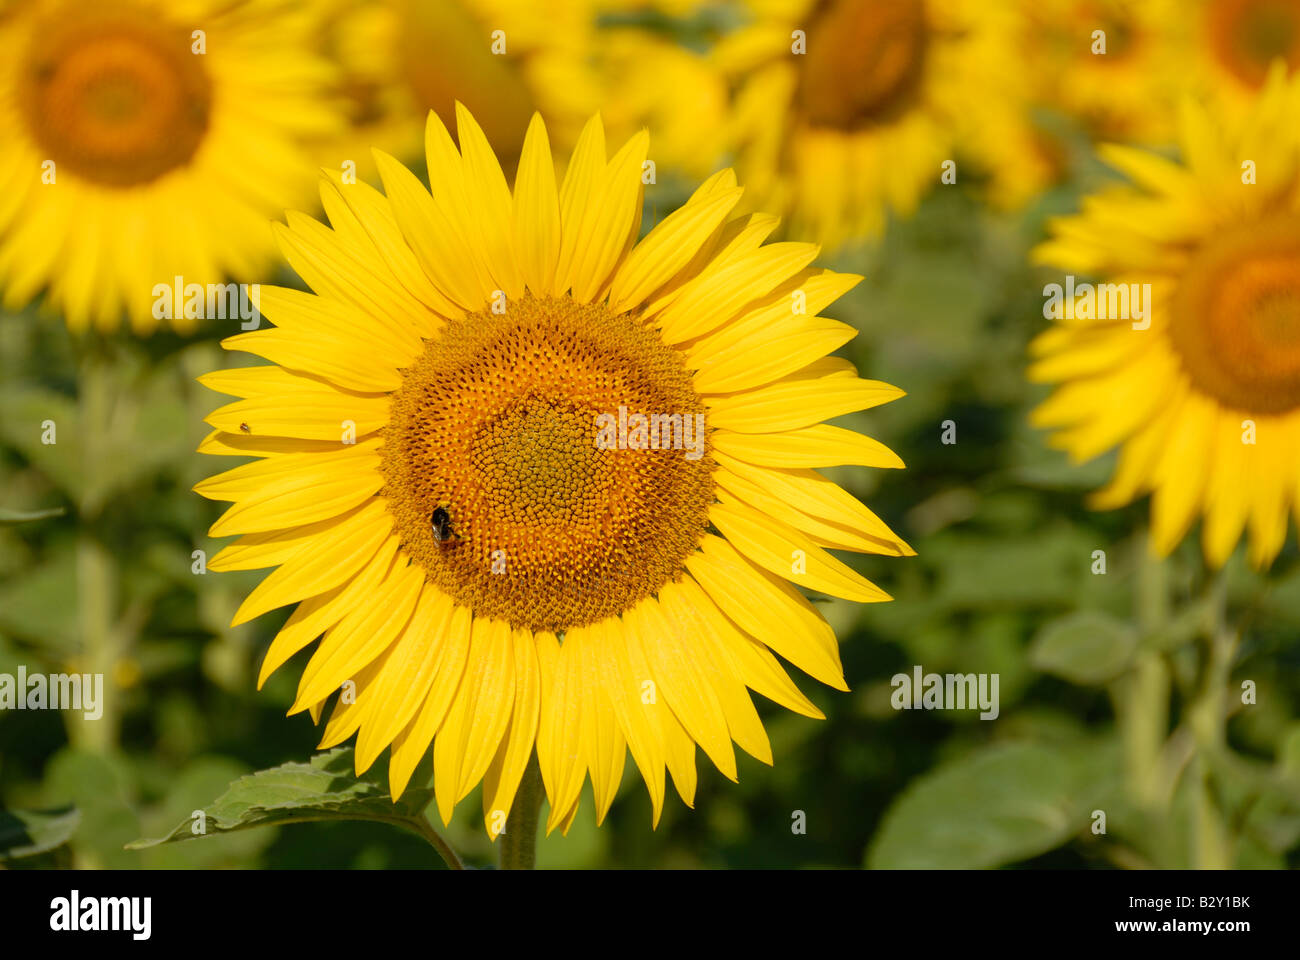 Stock photo of yellow sunflowers in a field in France Stock Photo